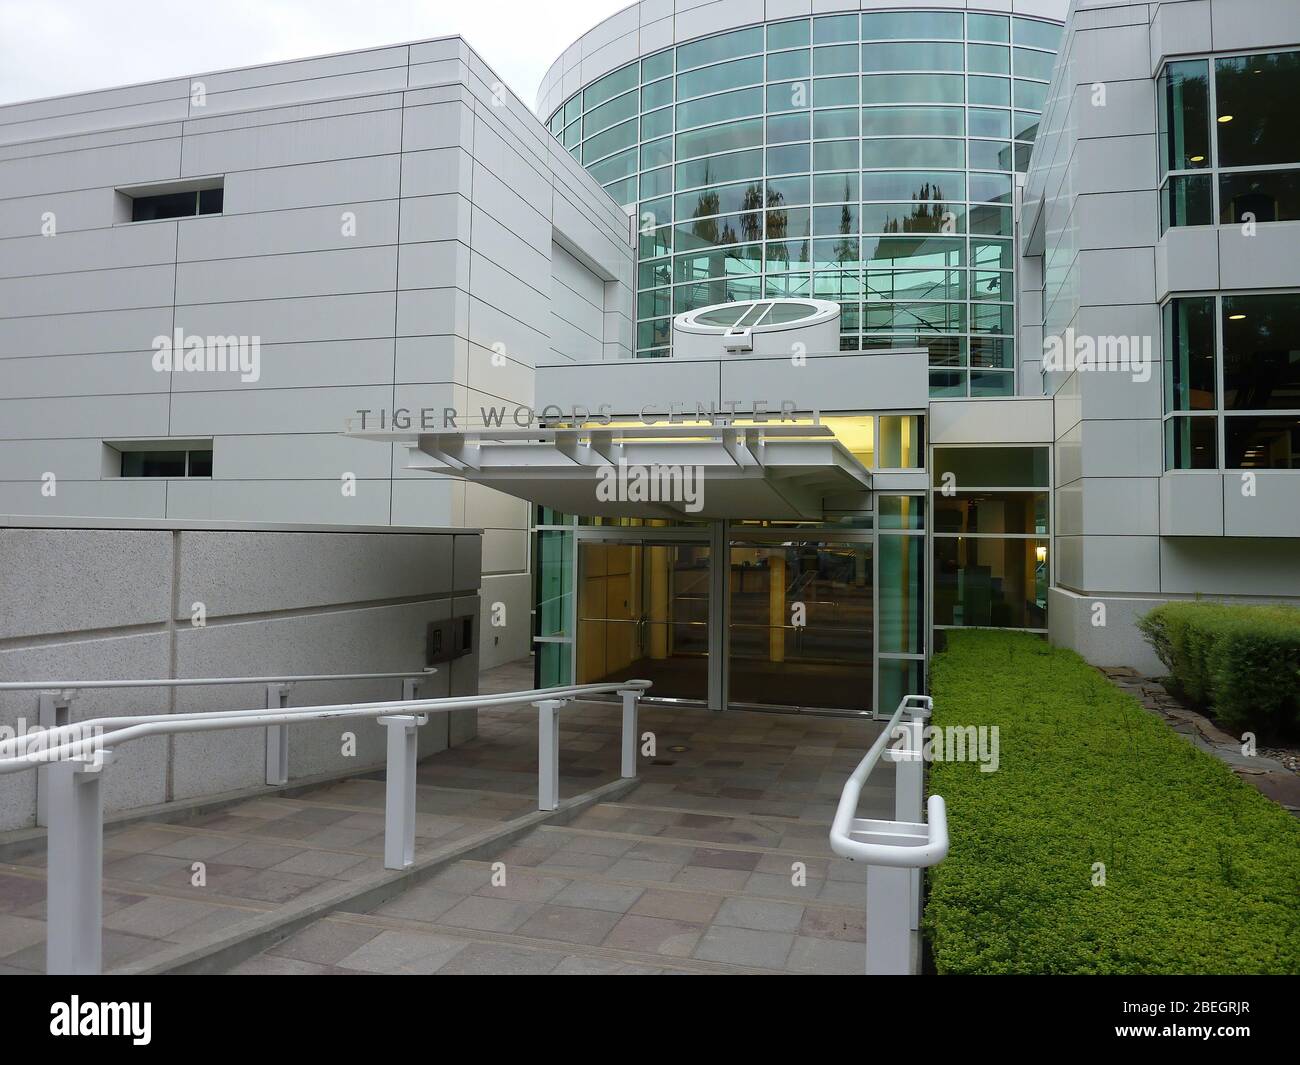 Oregon, AUG 7, 2009 - Exterior view of the Tiger Woods Center of Nike World  Headquarters Stock Photo - Alamy